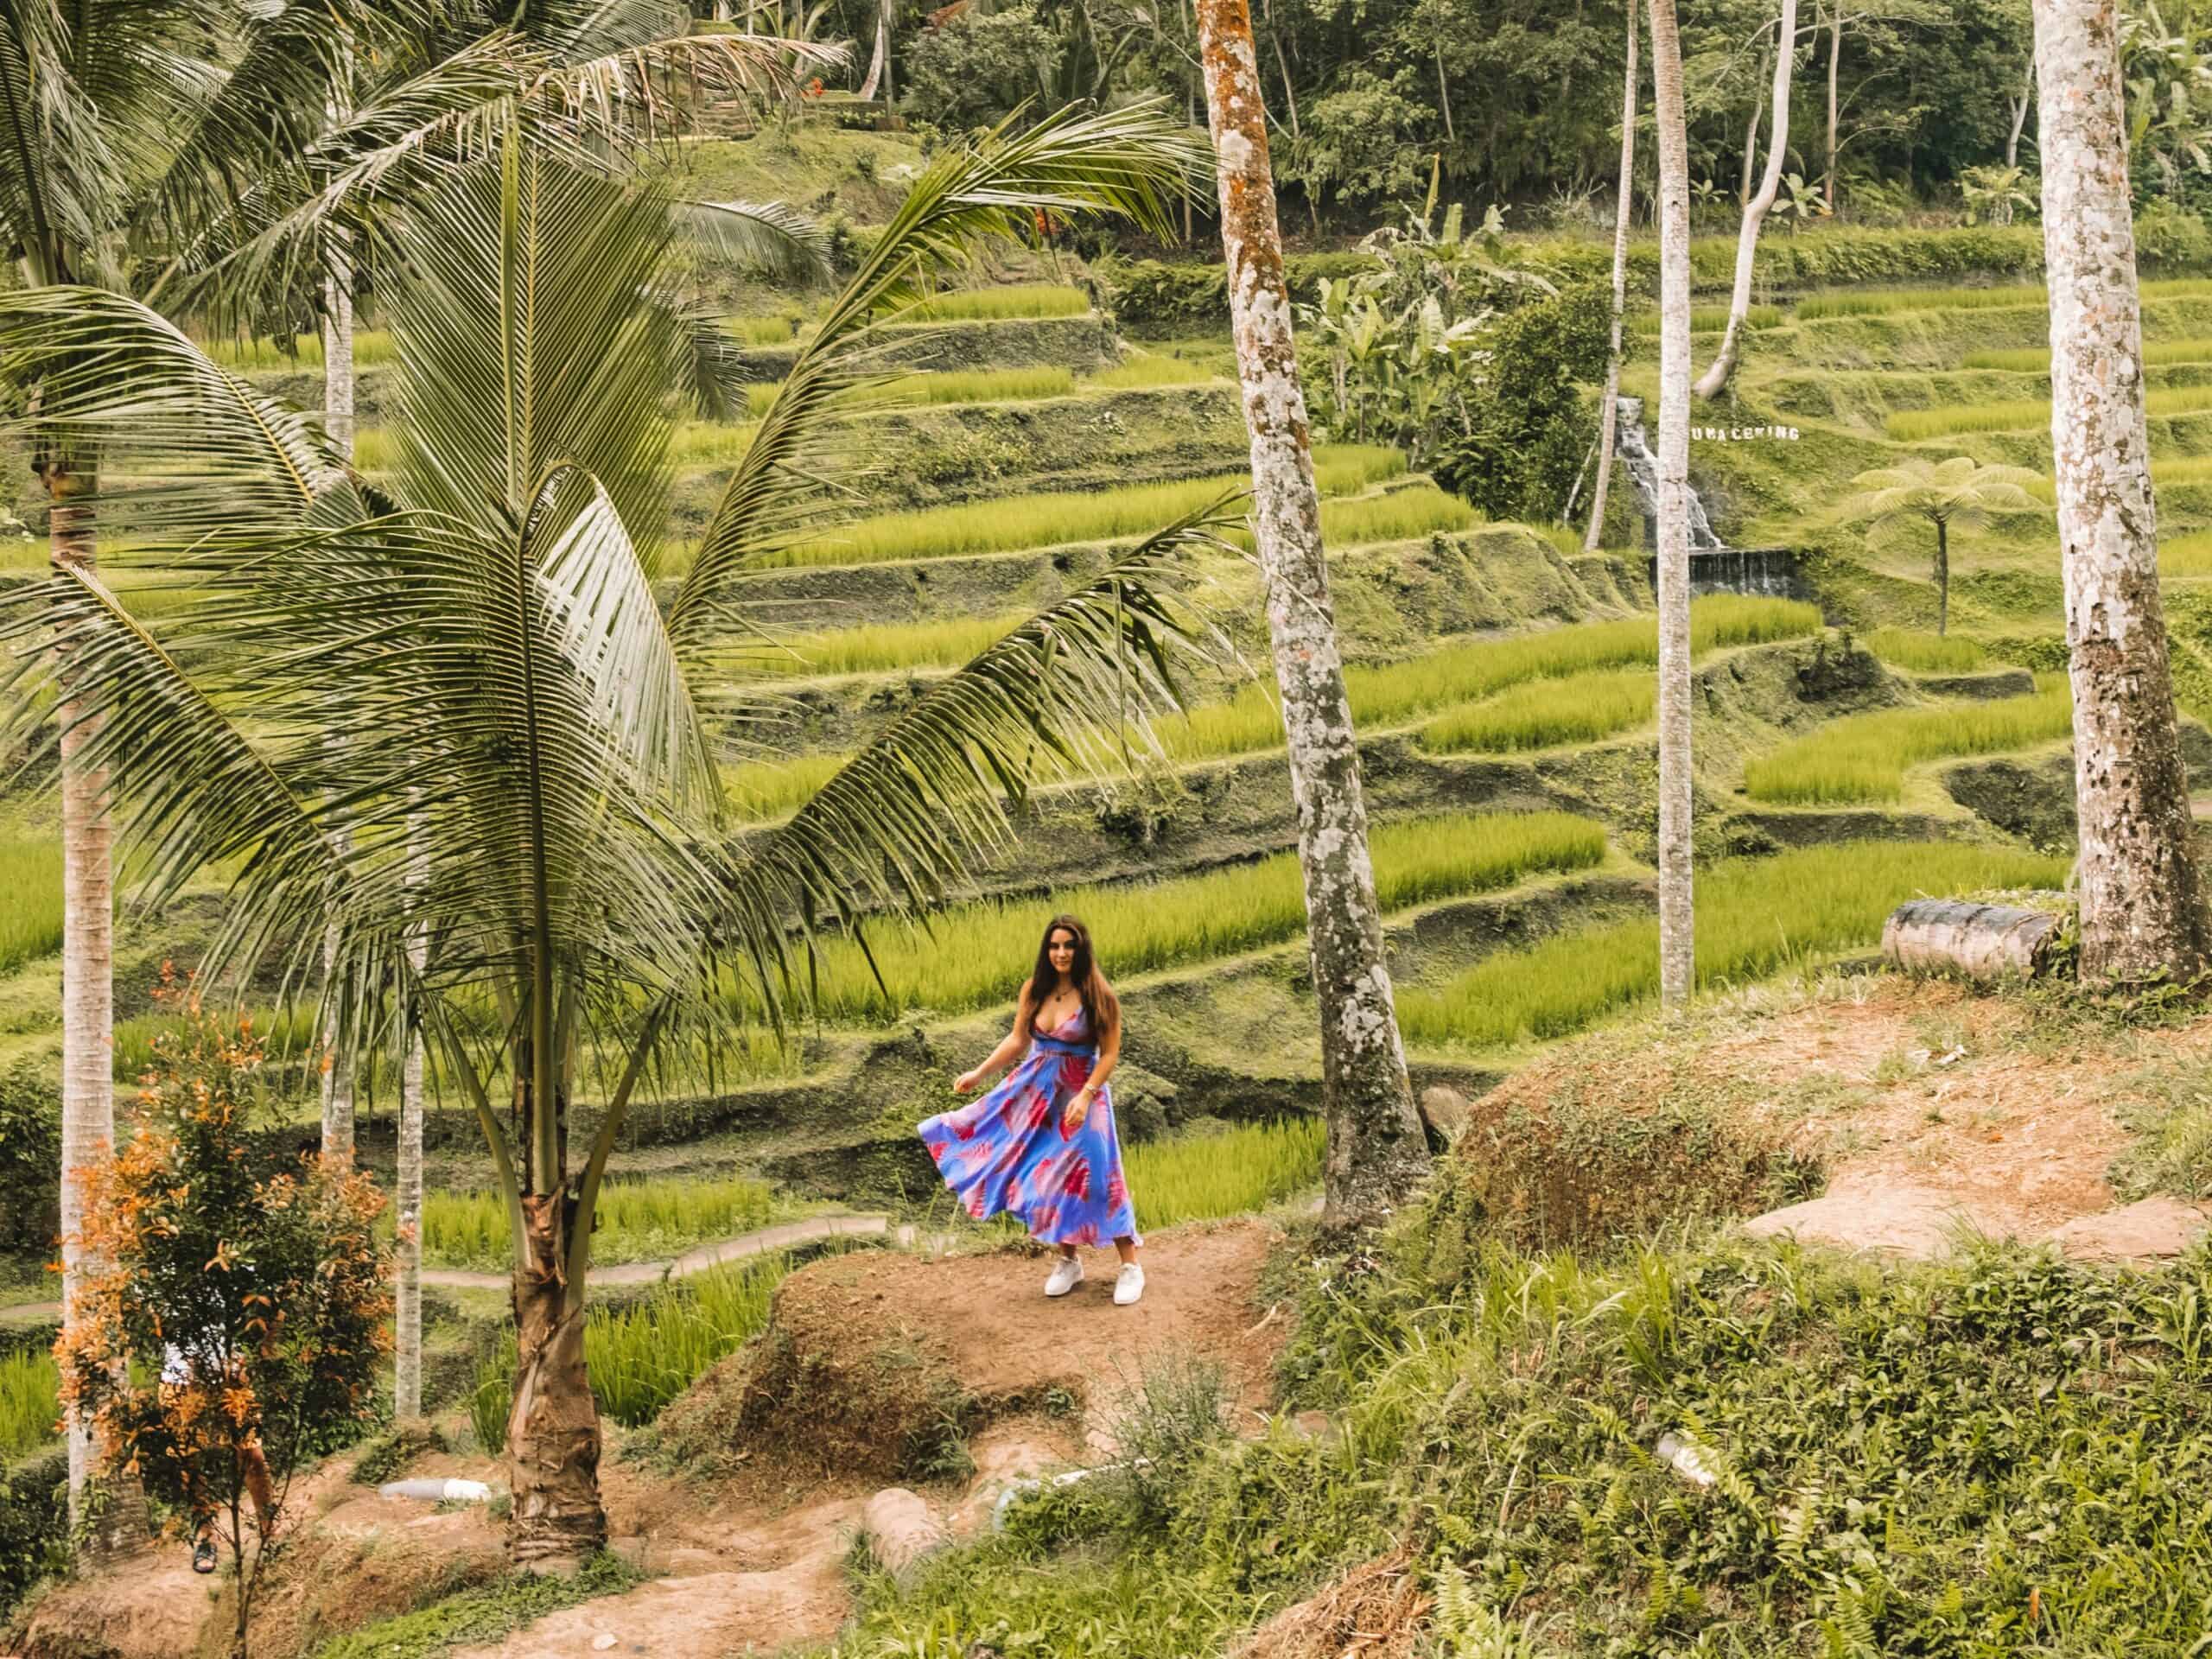 How to Spend 4 Days in Ubud